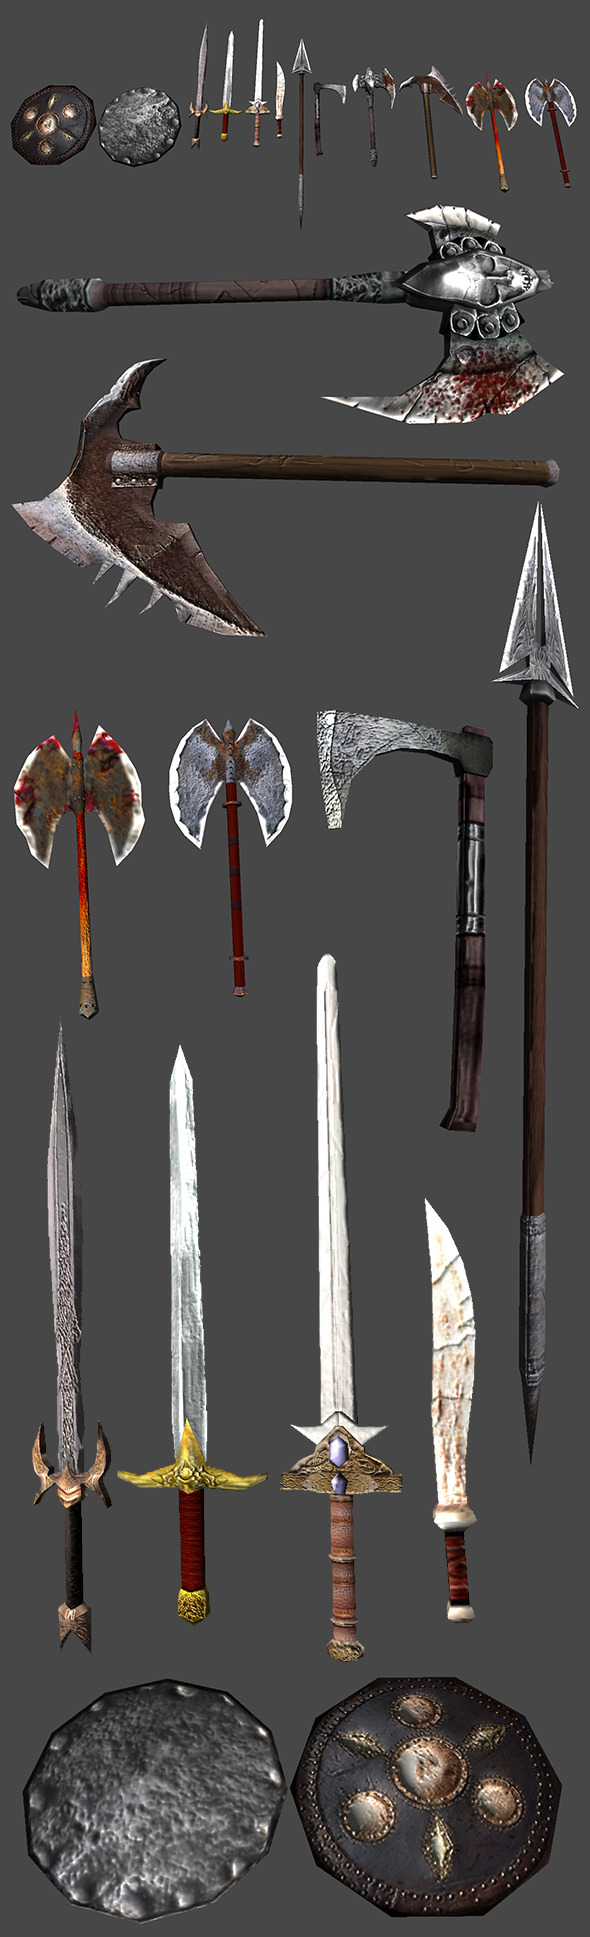 Cold Weapons LowPoly - 3Docean 5456734